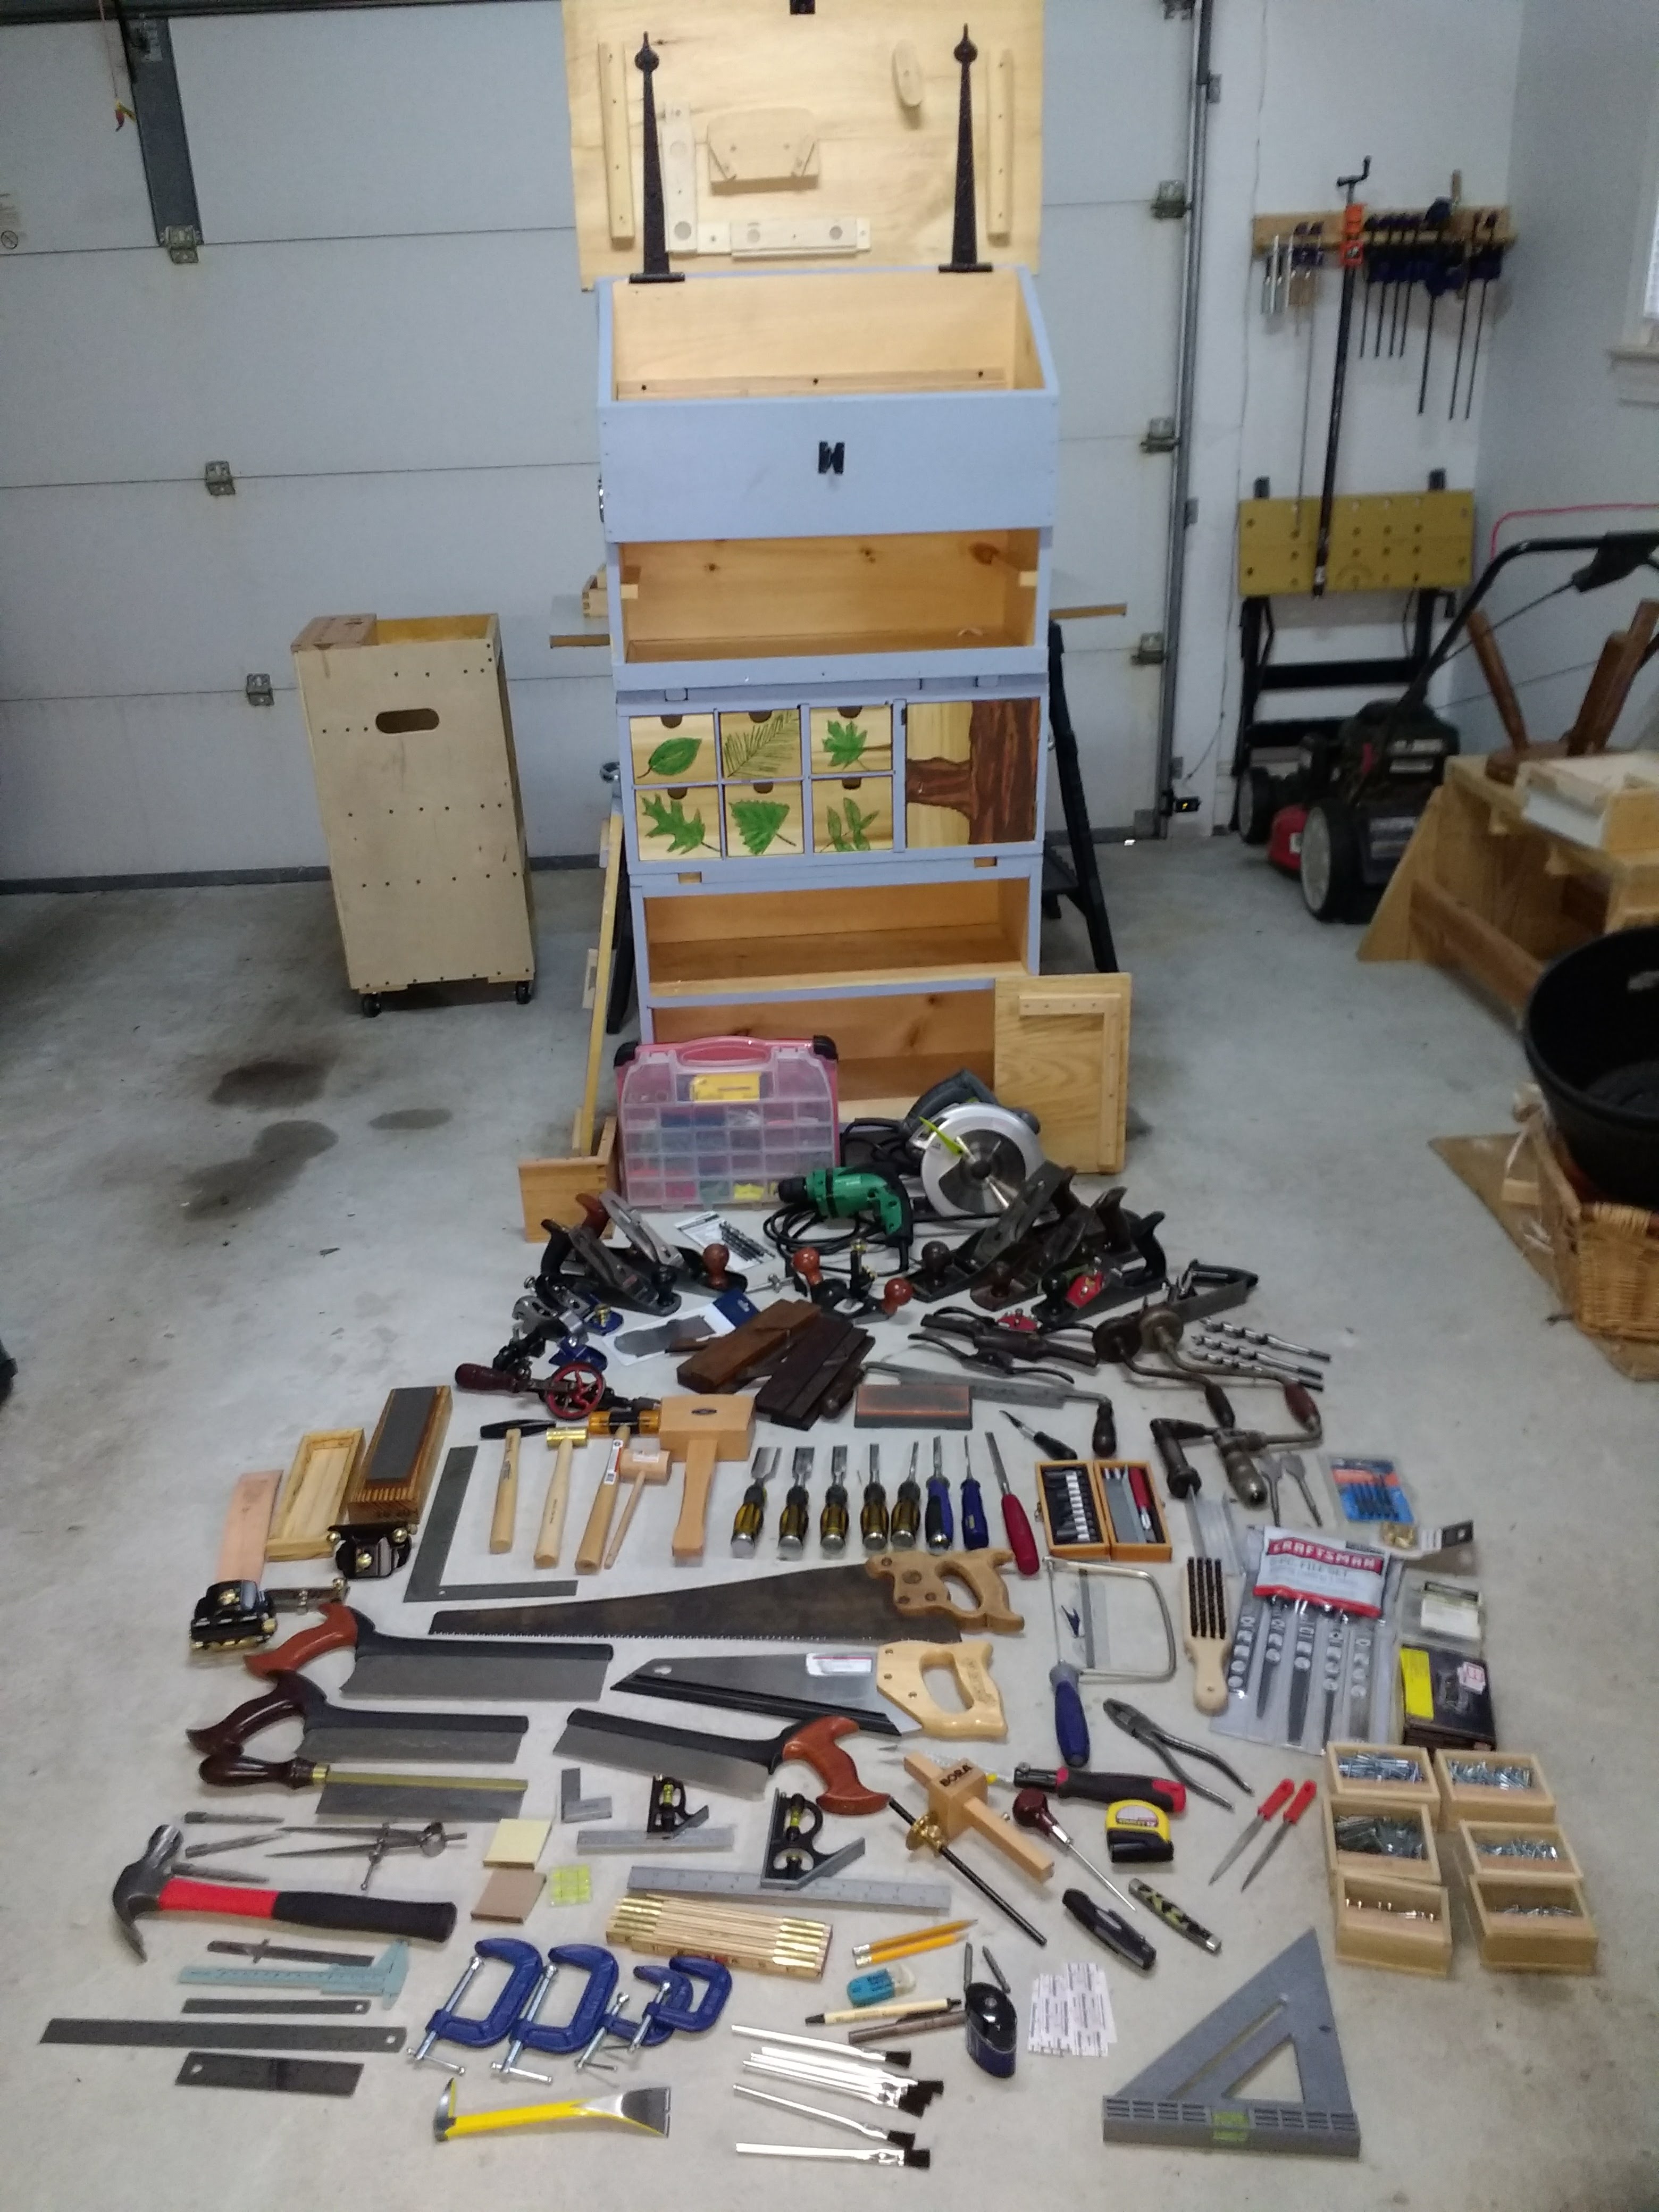 All Tools contained in the Dutch Chest_12.9.17.jpg